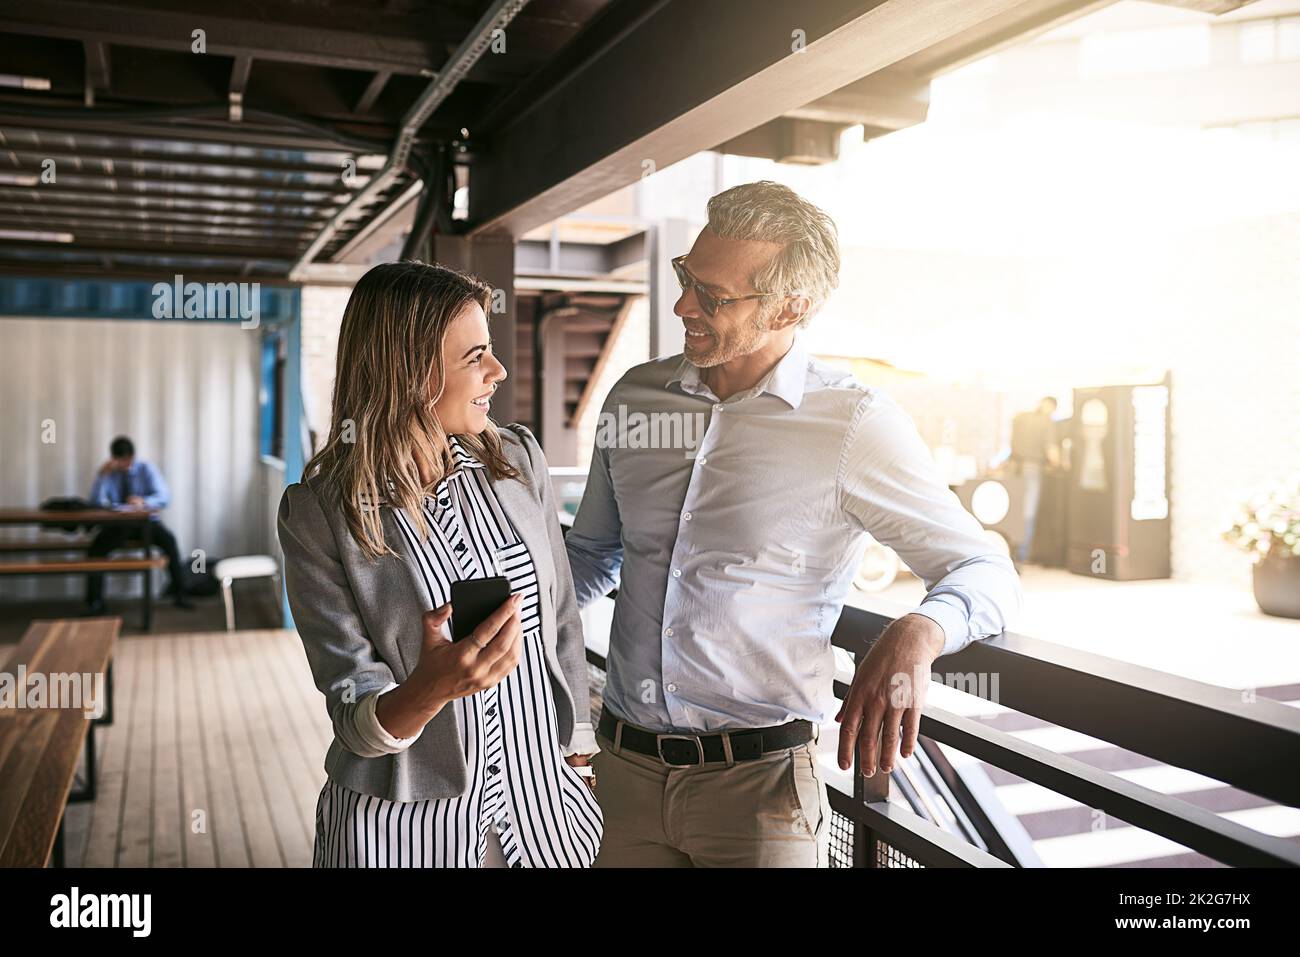 Taking their connection outdoors. Shot of two businesspeople using a cellphone outside. Stock Photo